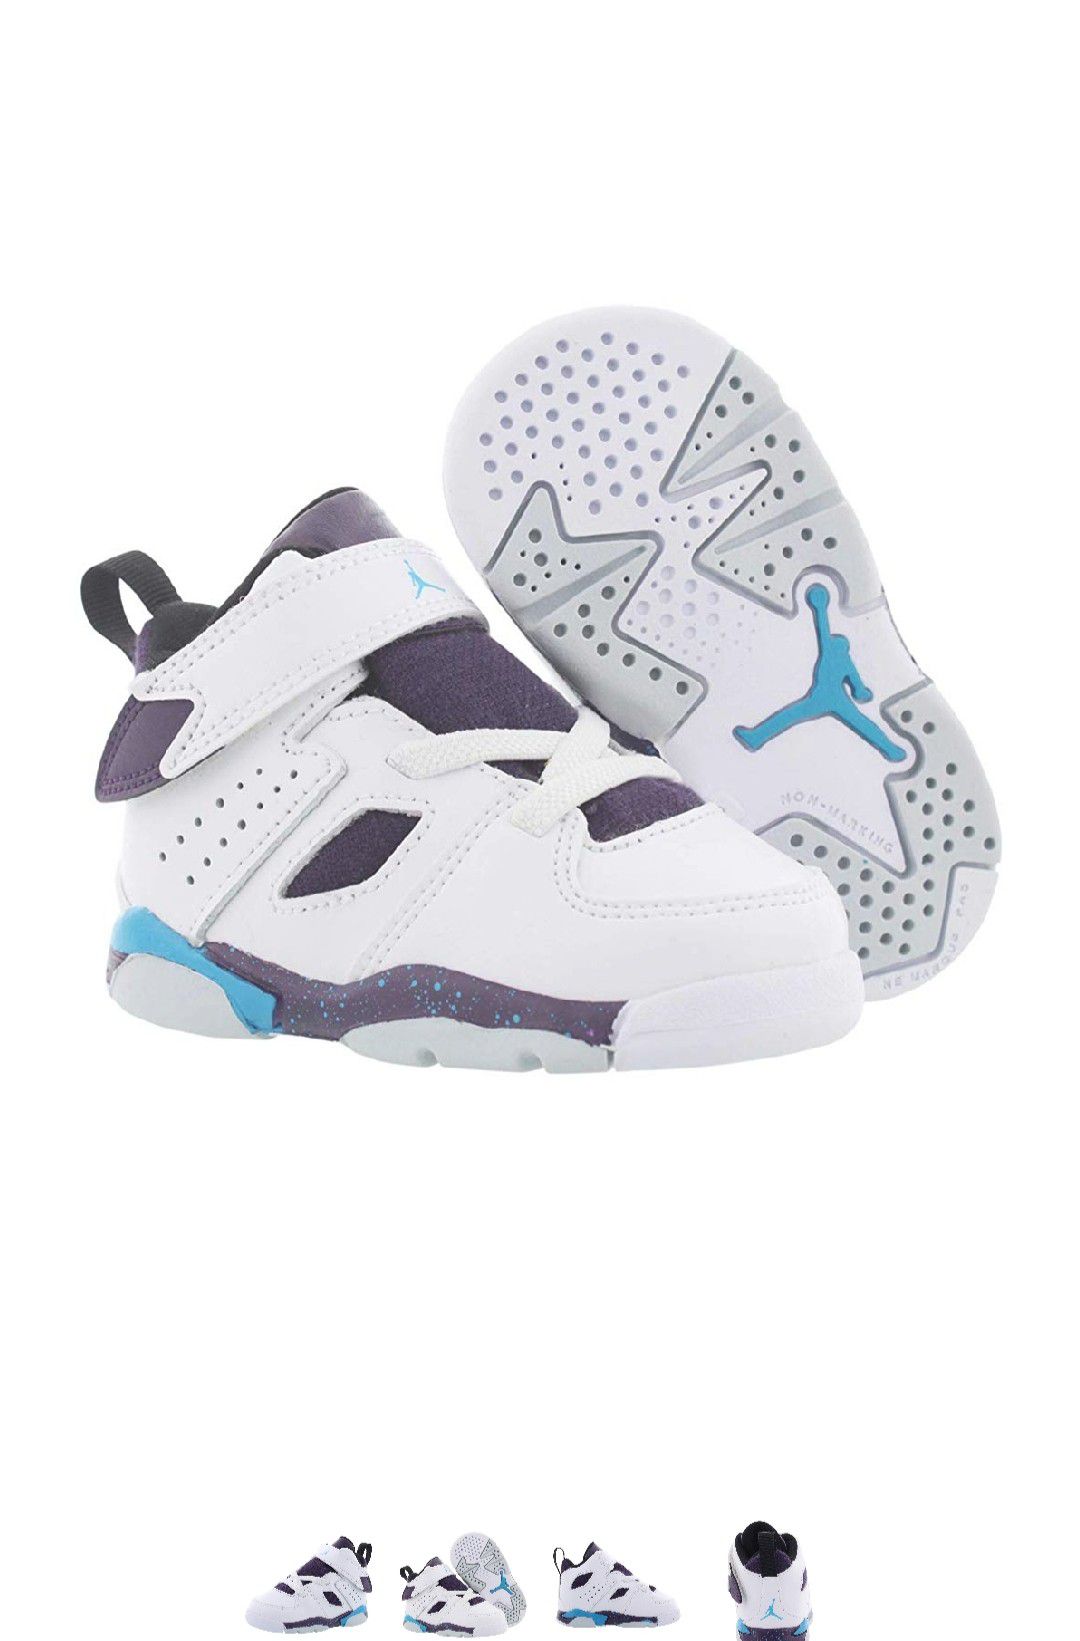 NIKE Jordan shoes different sizes and designs available for kids,youth